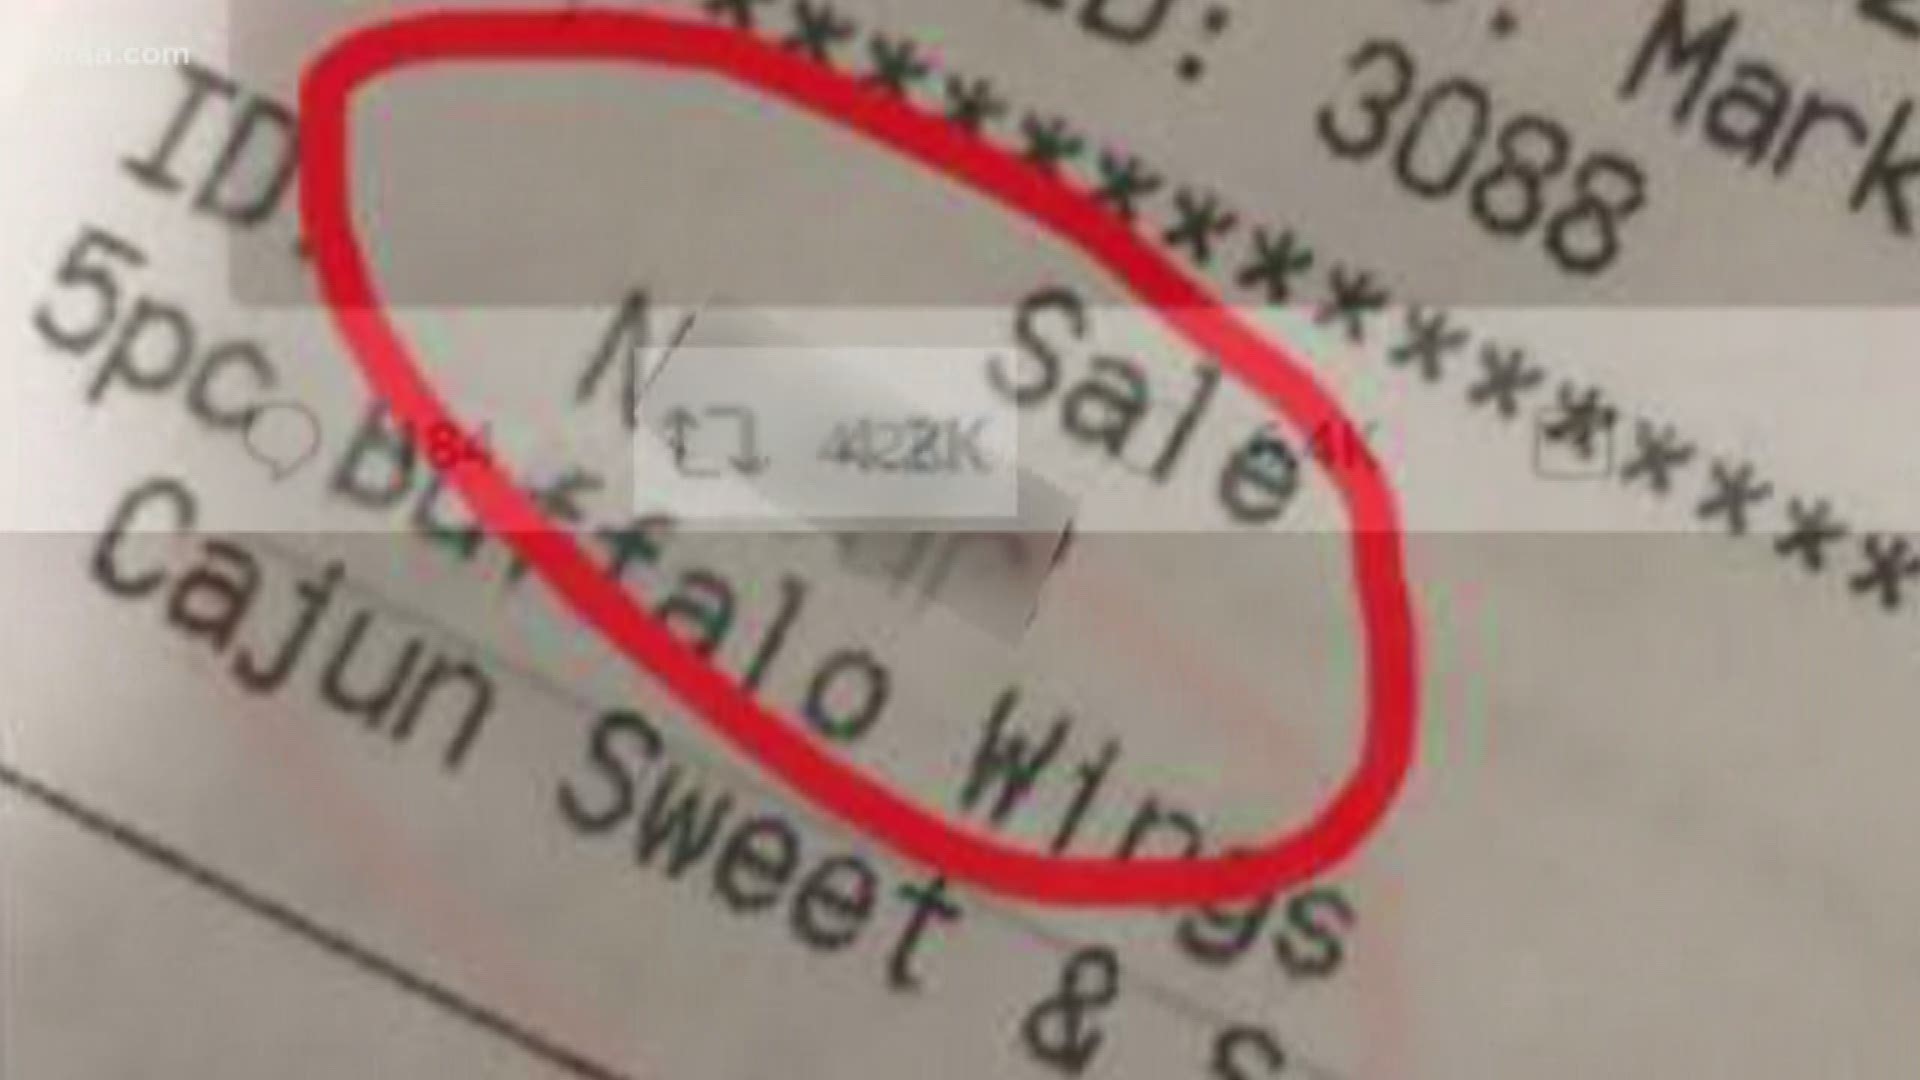 A picture of the receipt has been retweeted thousands of times.